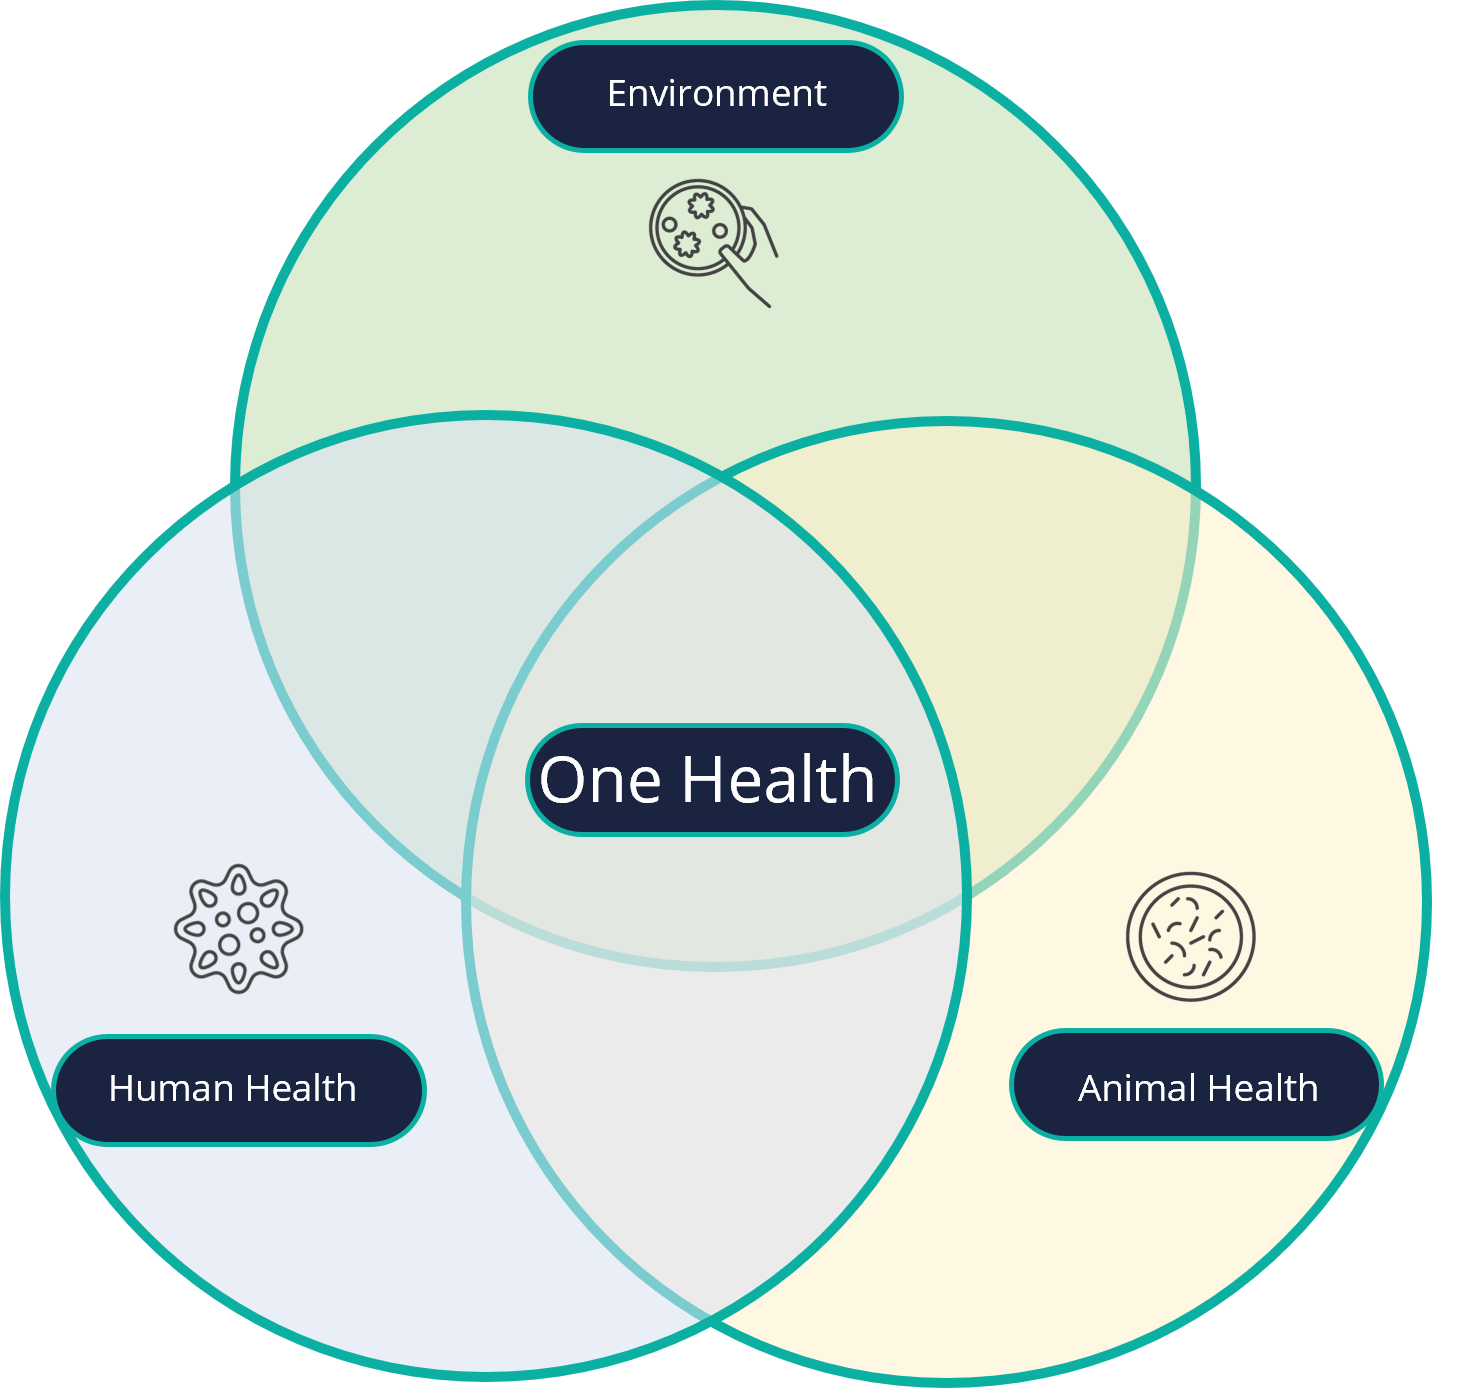 The One Health Concept And Its Two Pillars Vibiosphen